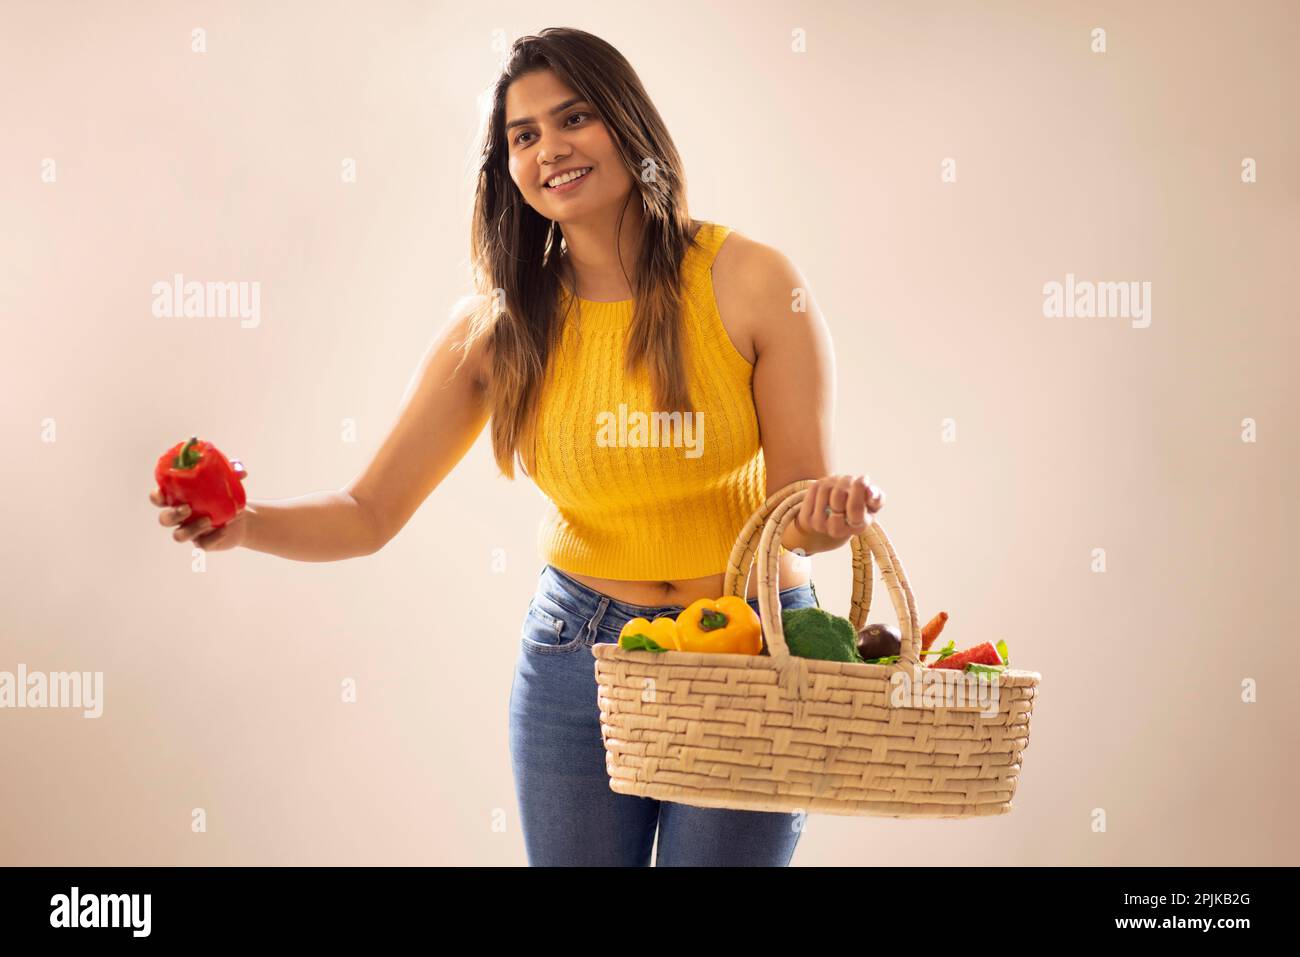 Smiling woman holding a basket of fresh vegetables and red bell pepper against white background Stock Photo